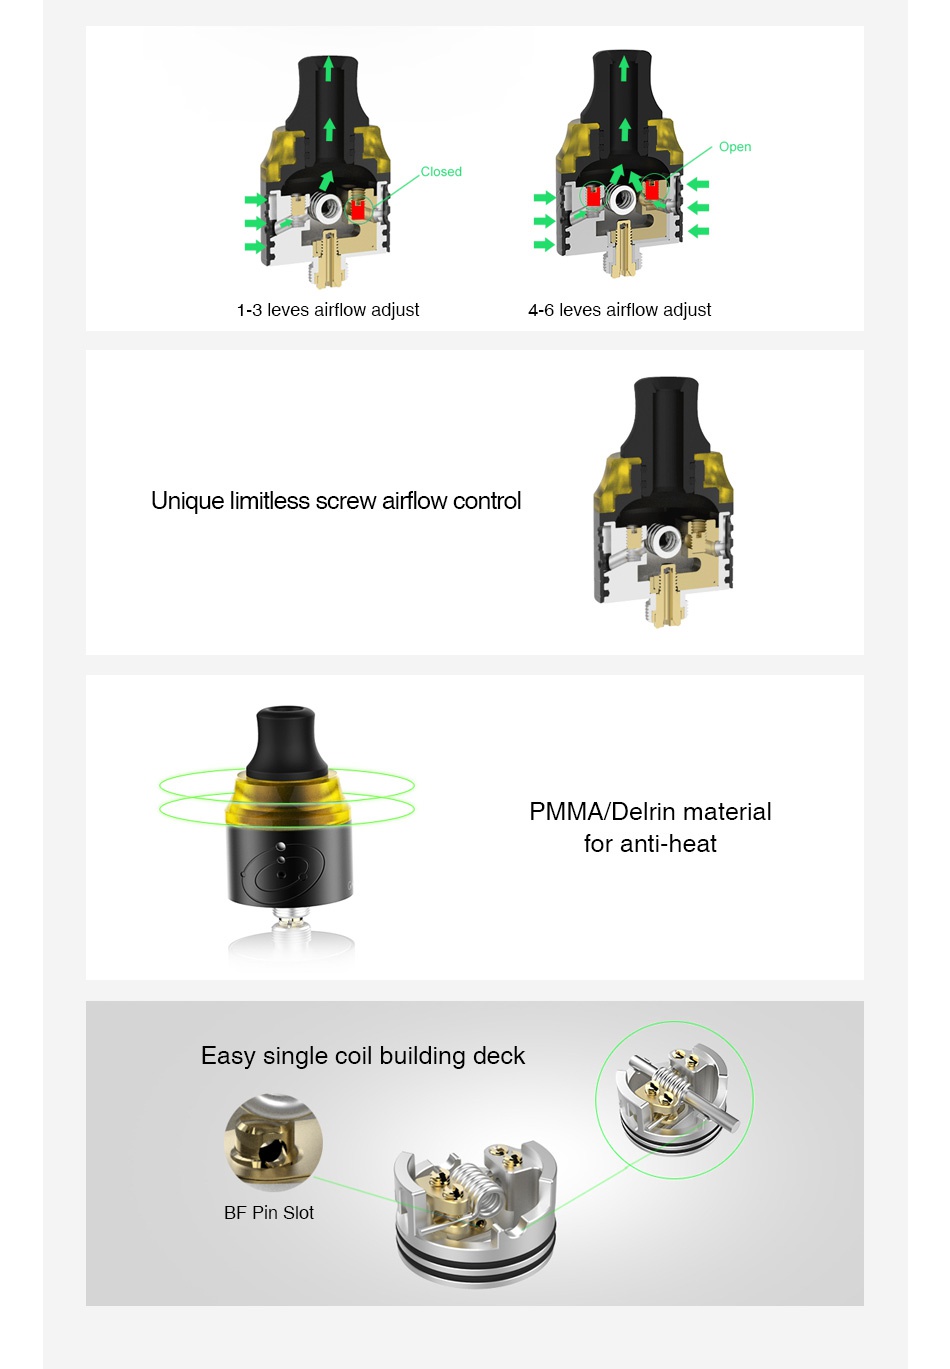 Vapefly Galaxies MTL RDA Closed 1 3 leves airflow adjust 4 6 leves airflow adjust Unique limitless screw airflow control PMMA Delrin material for anti heat Easy single coil building deck BF Pin slot